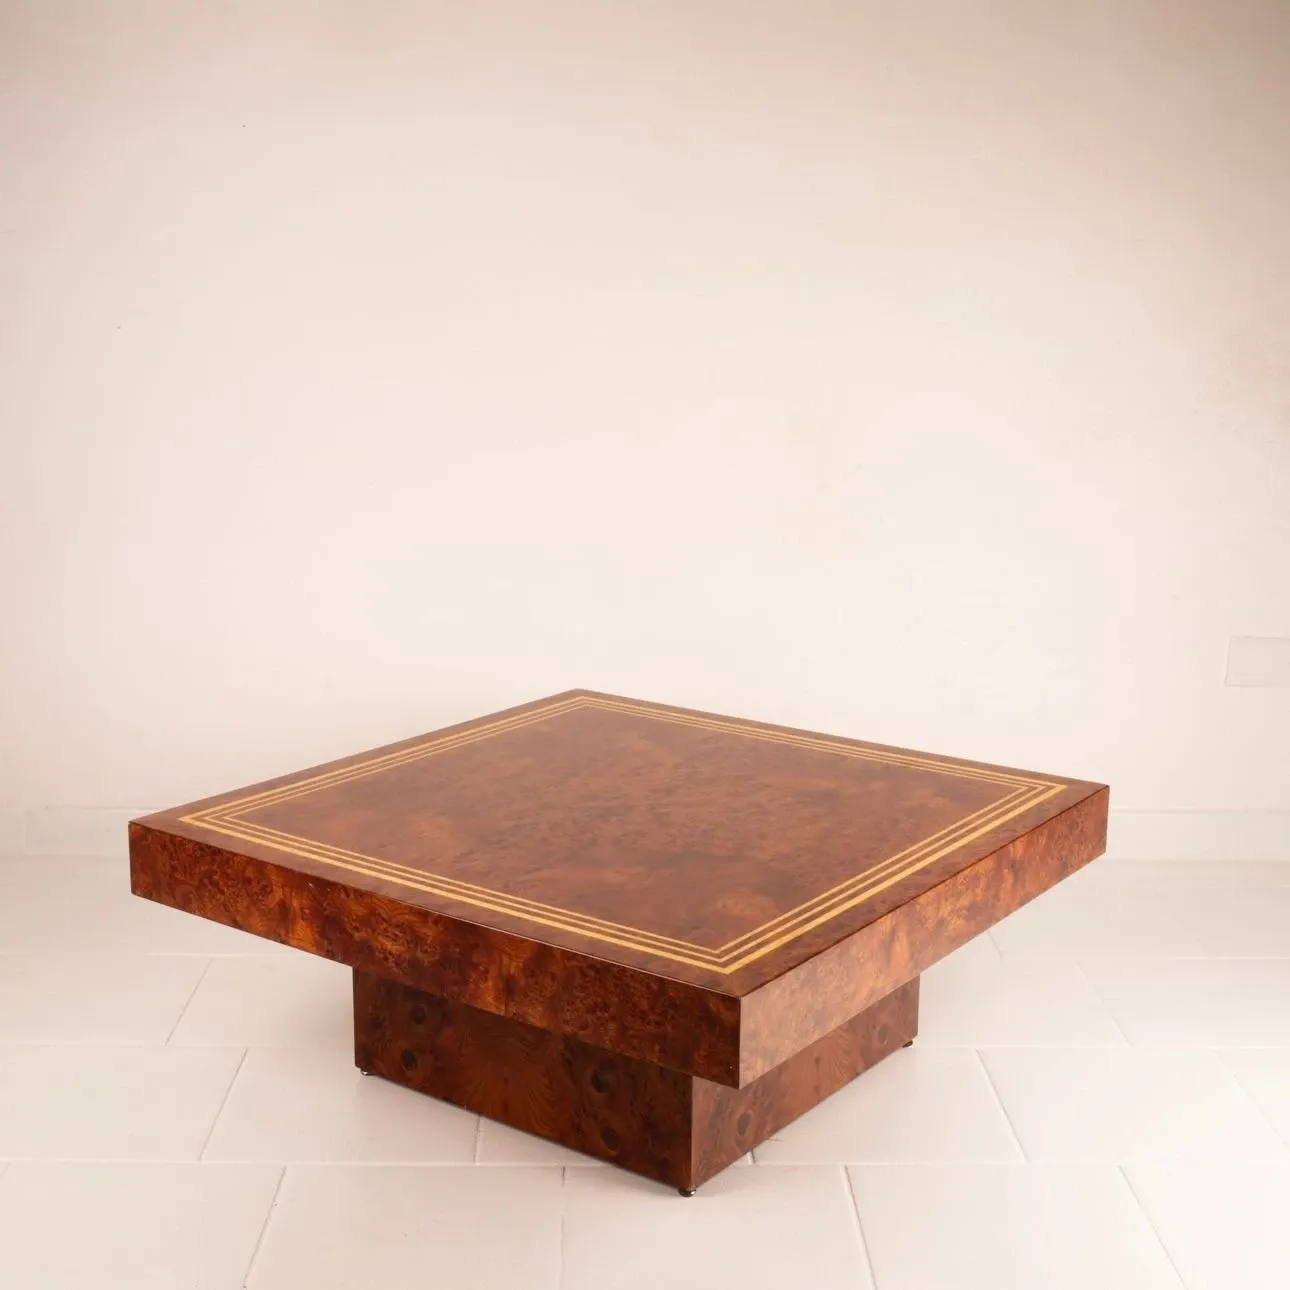 Vintage wooden coffee table (1970s), image